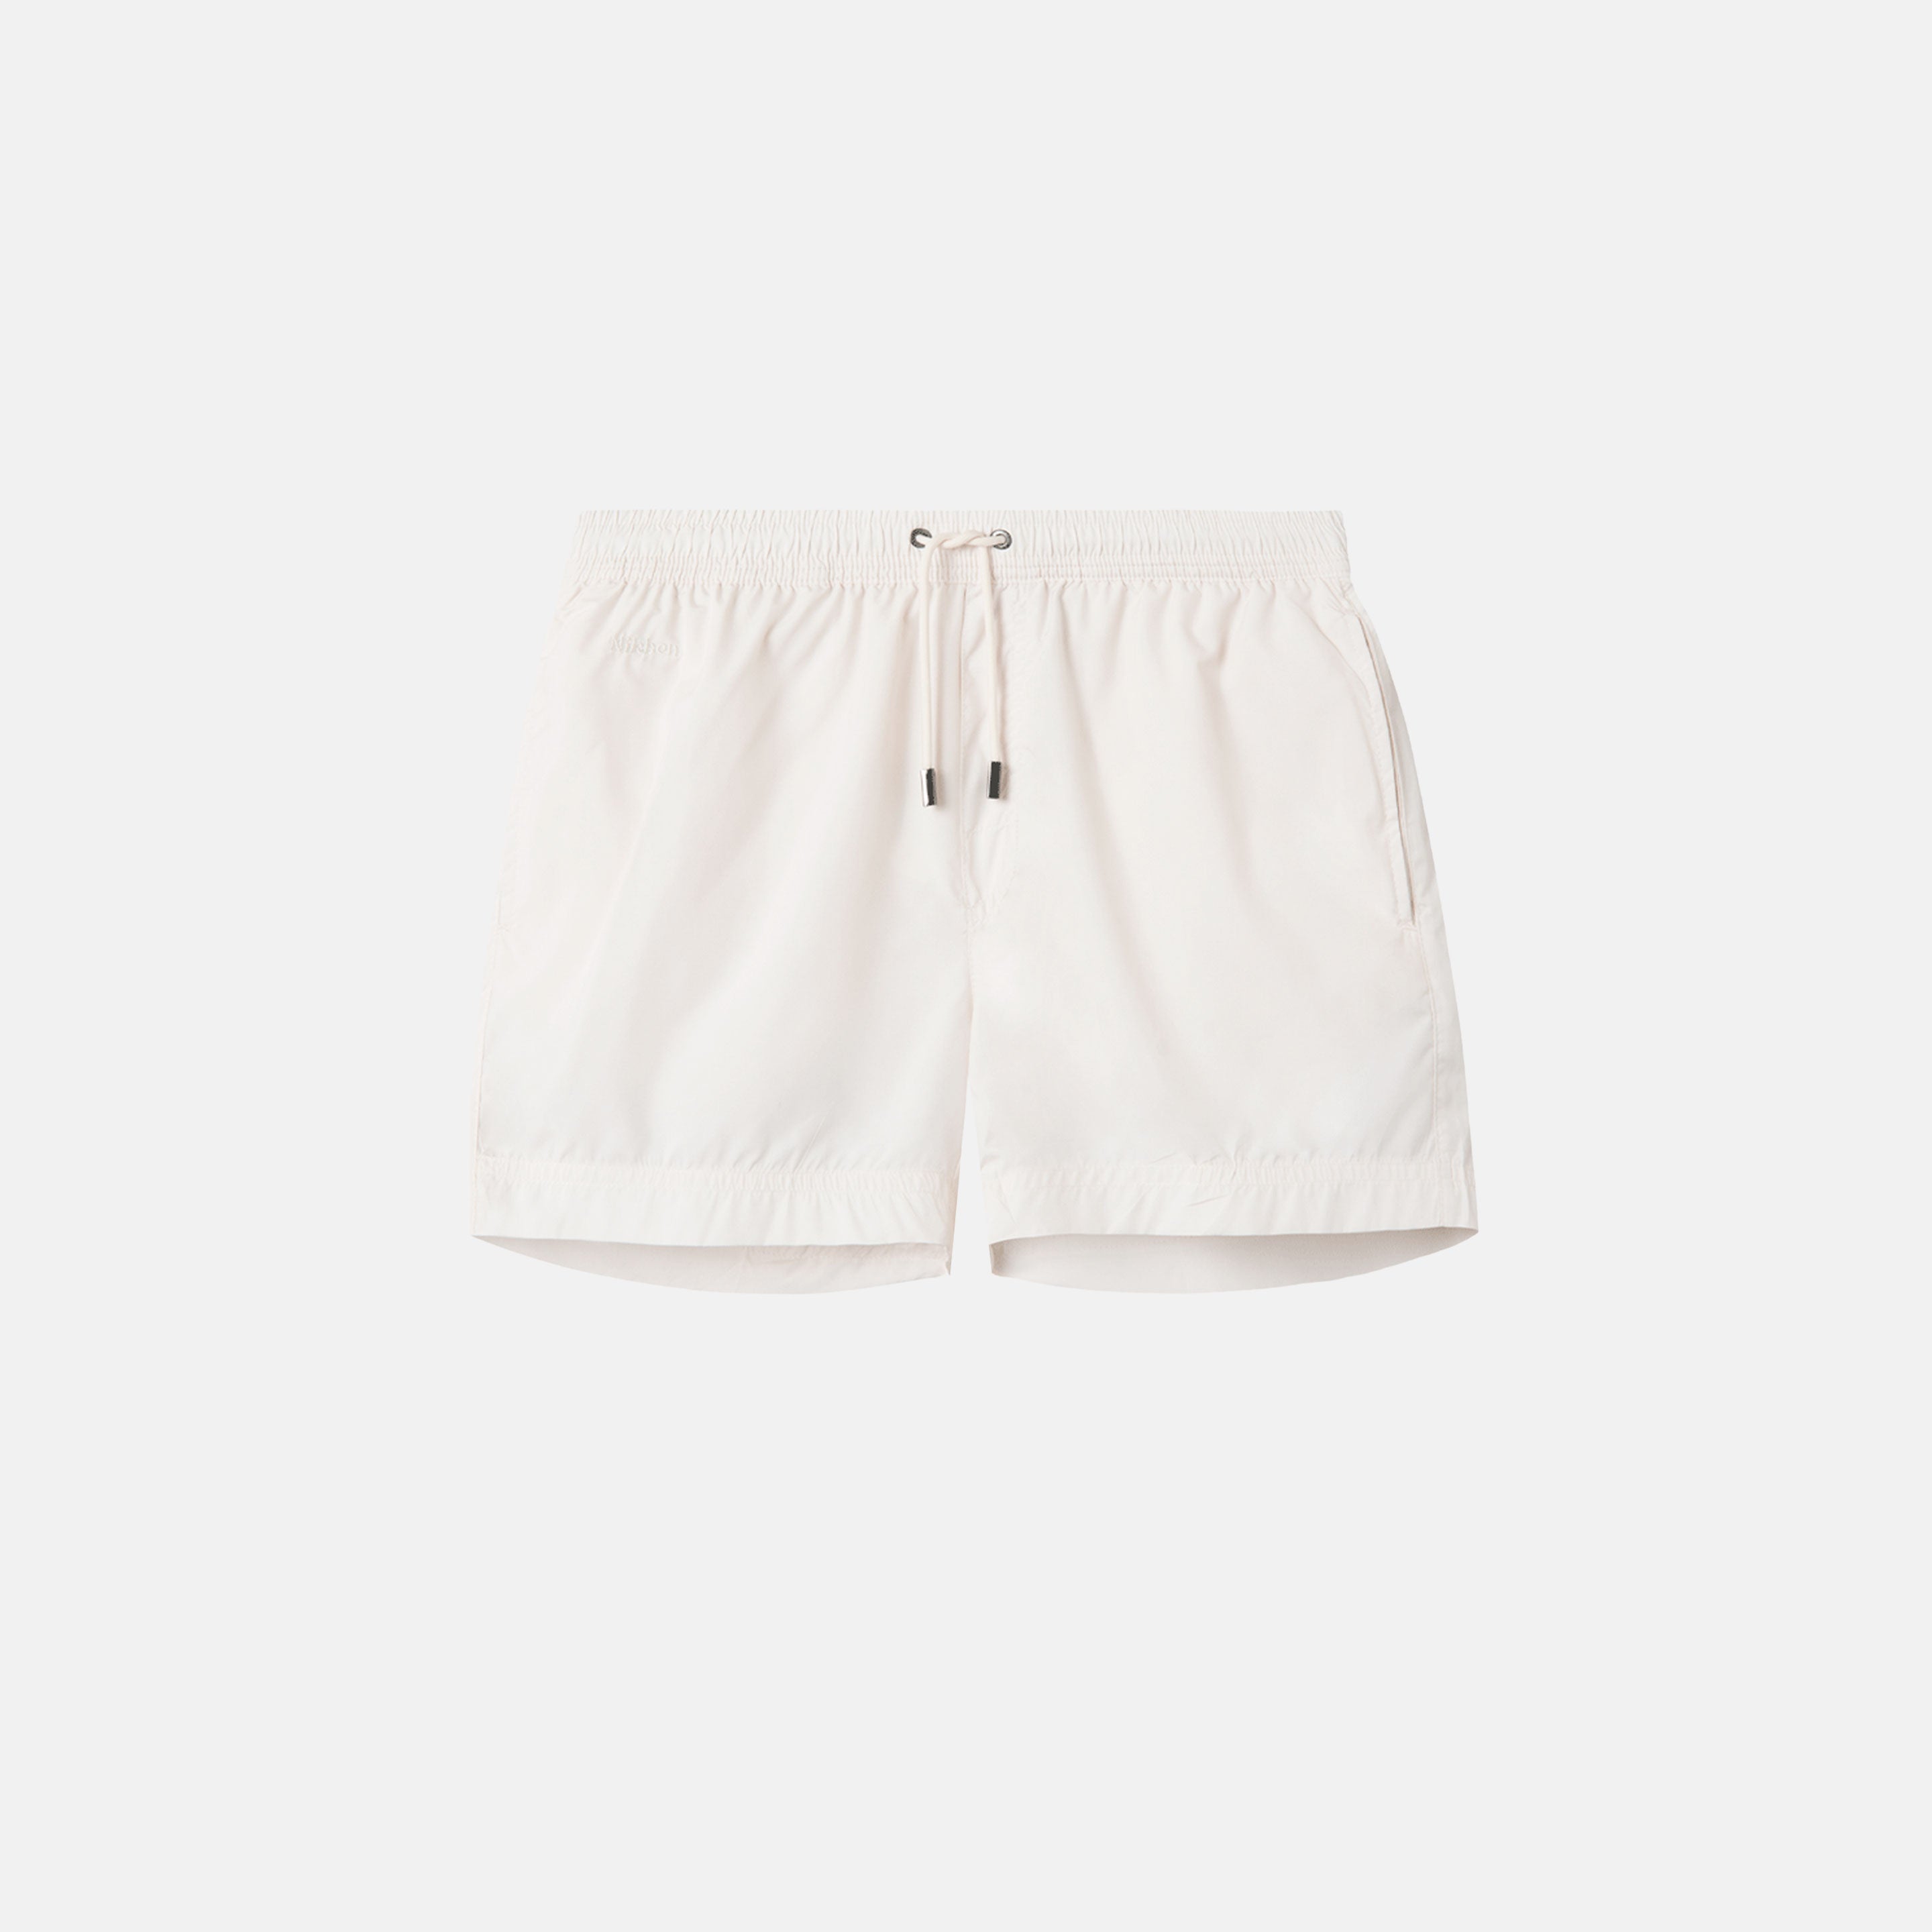 Cream white swim trunks. Mid length with drawstring and two side pockets.